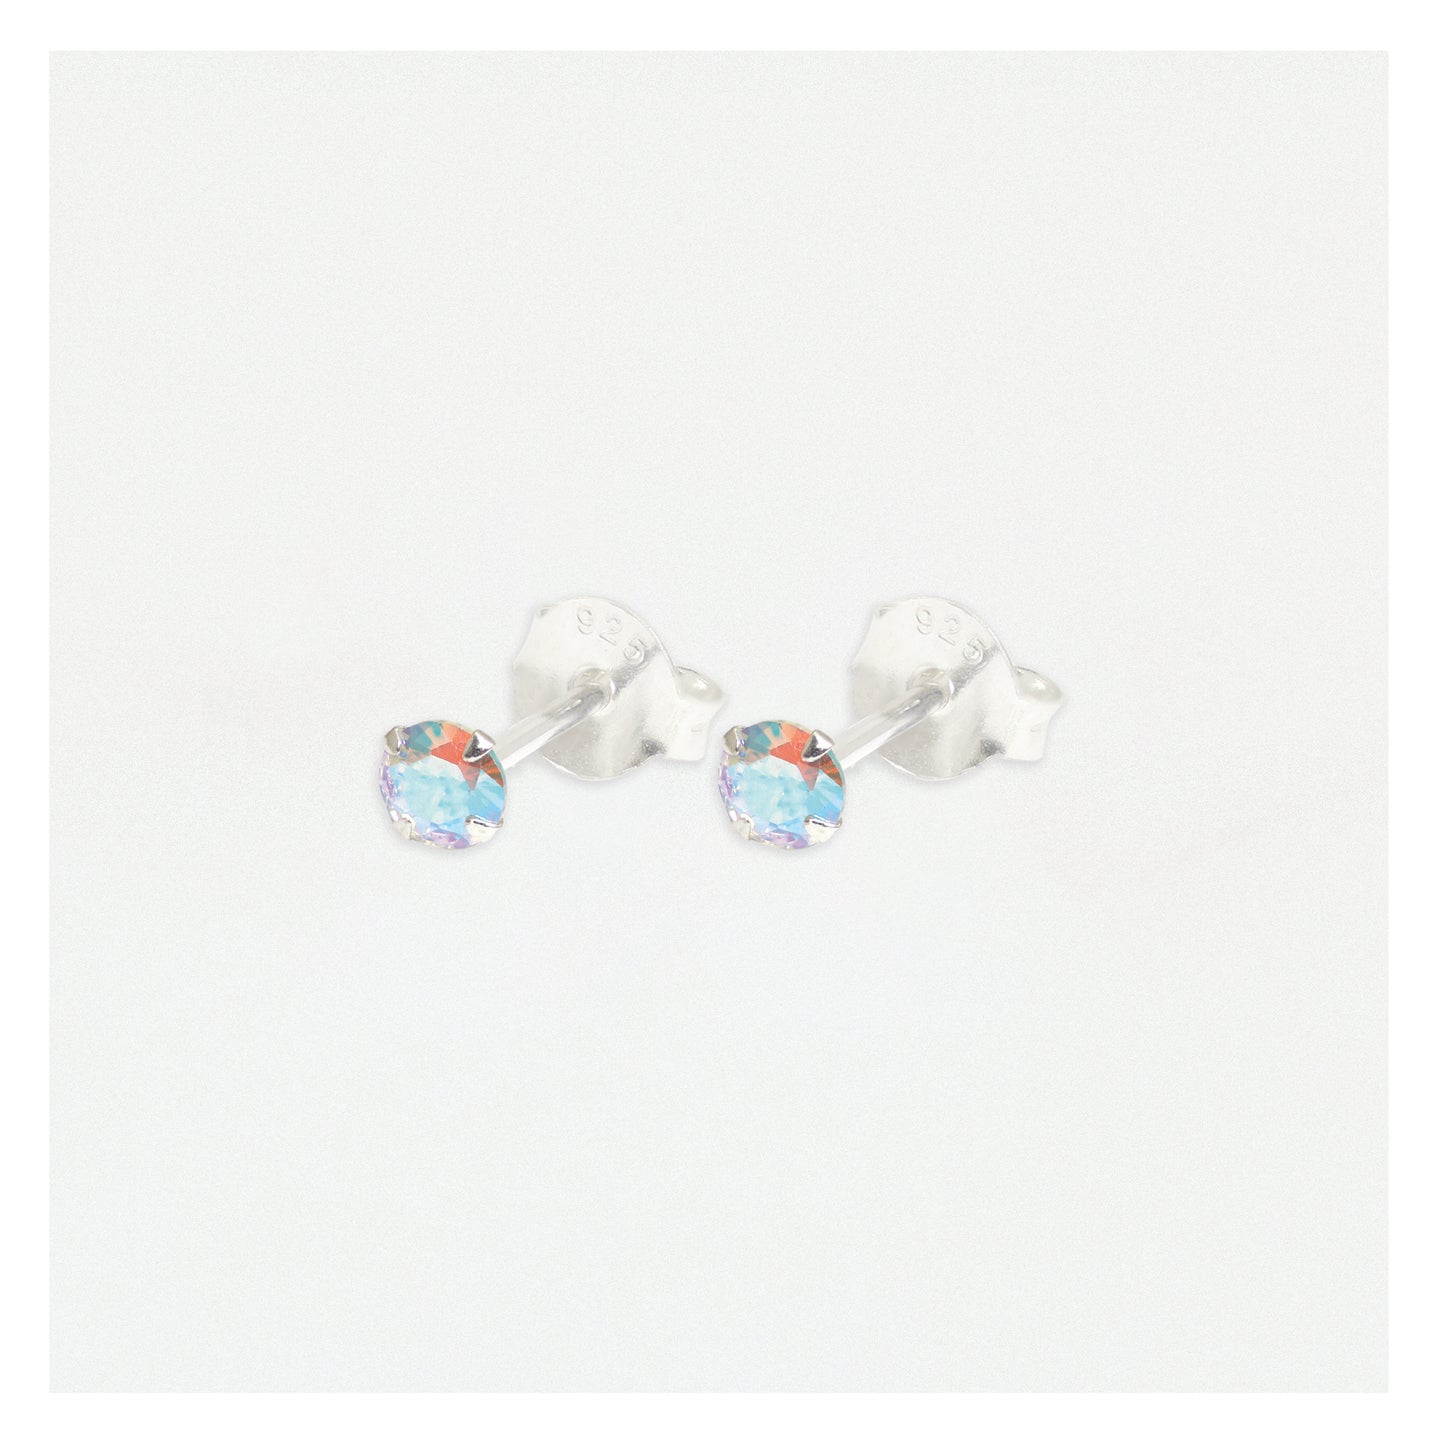 Crystal Rainbow Silver Ear Stud Earrings Crumble and Core   